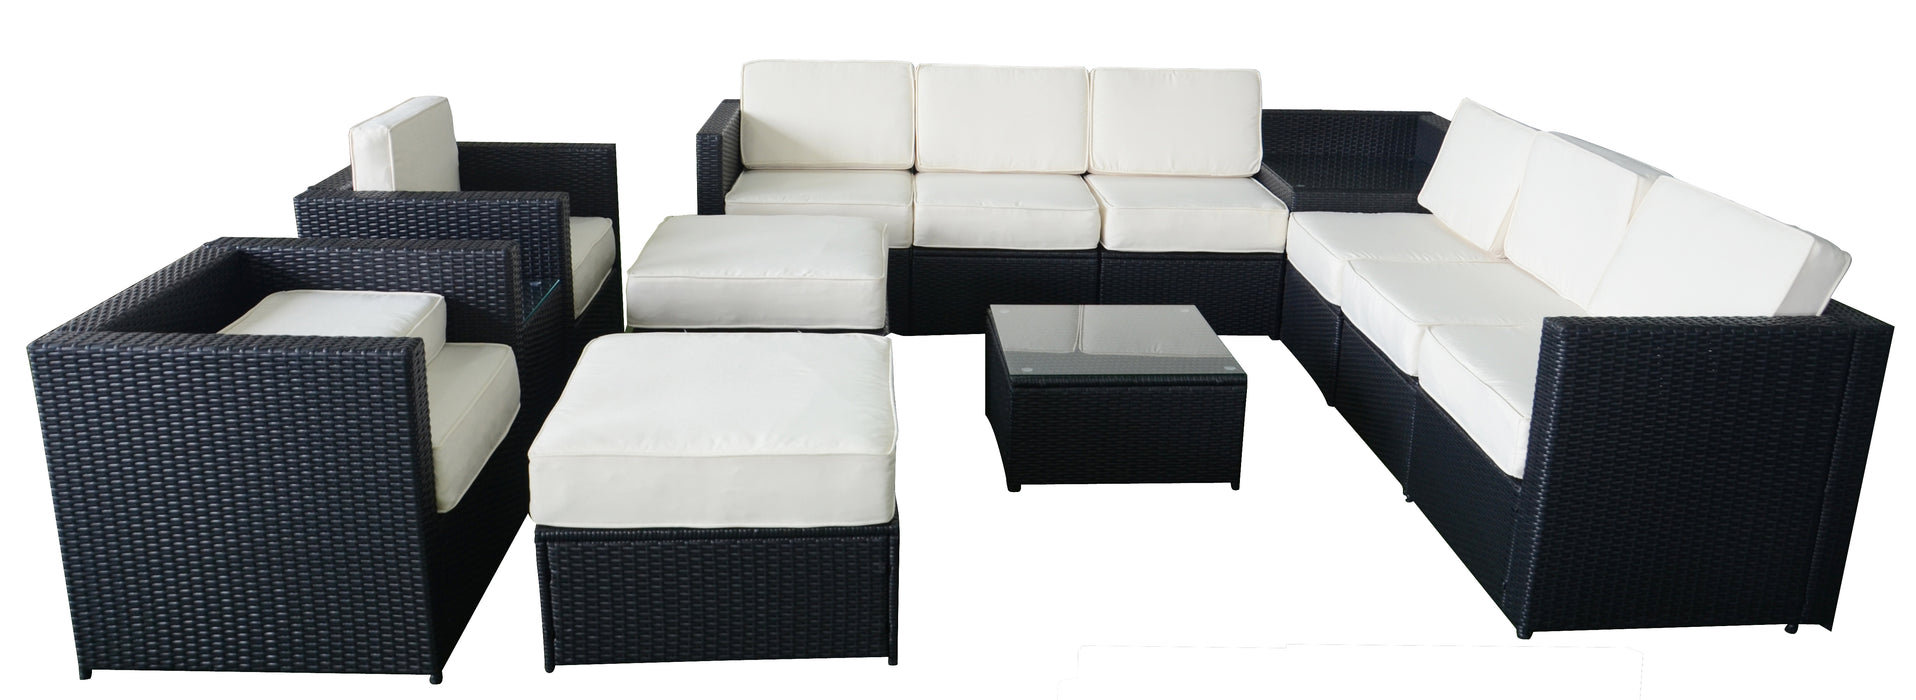 Mcombo Outdoor Patio Black Wicker Furniture Sectional Set All-Weather Resin Rattan Chair Conversation Sofas with Water Resistant Cushion Covers 6085-S1013